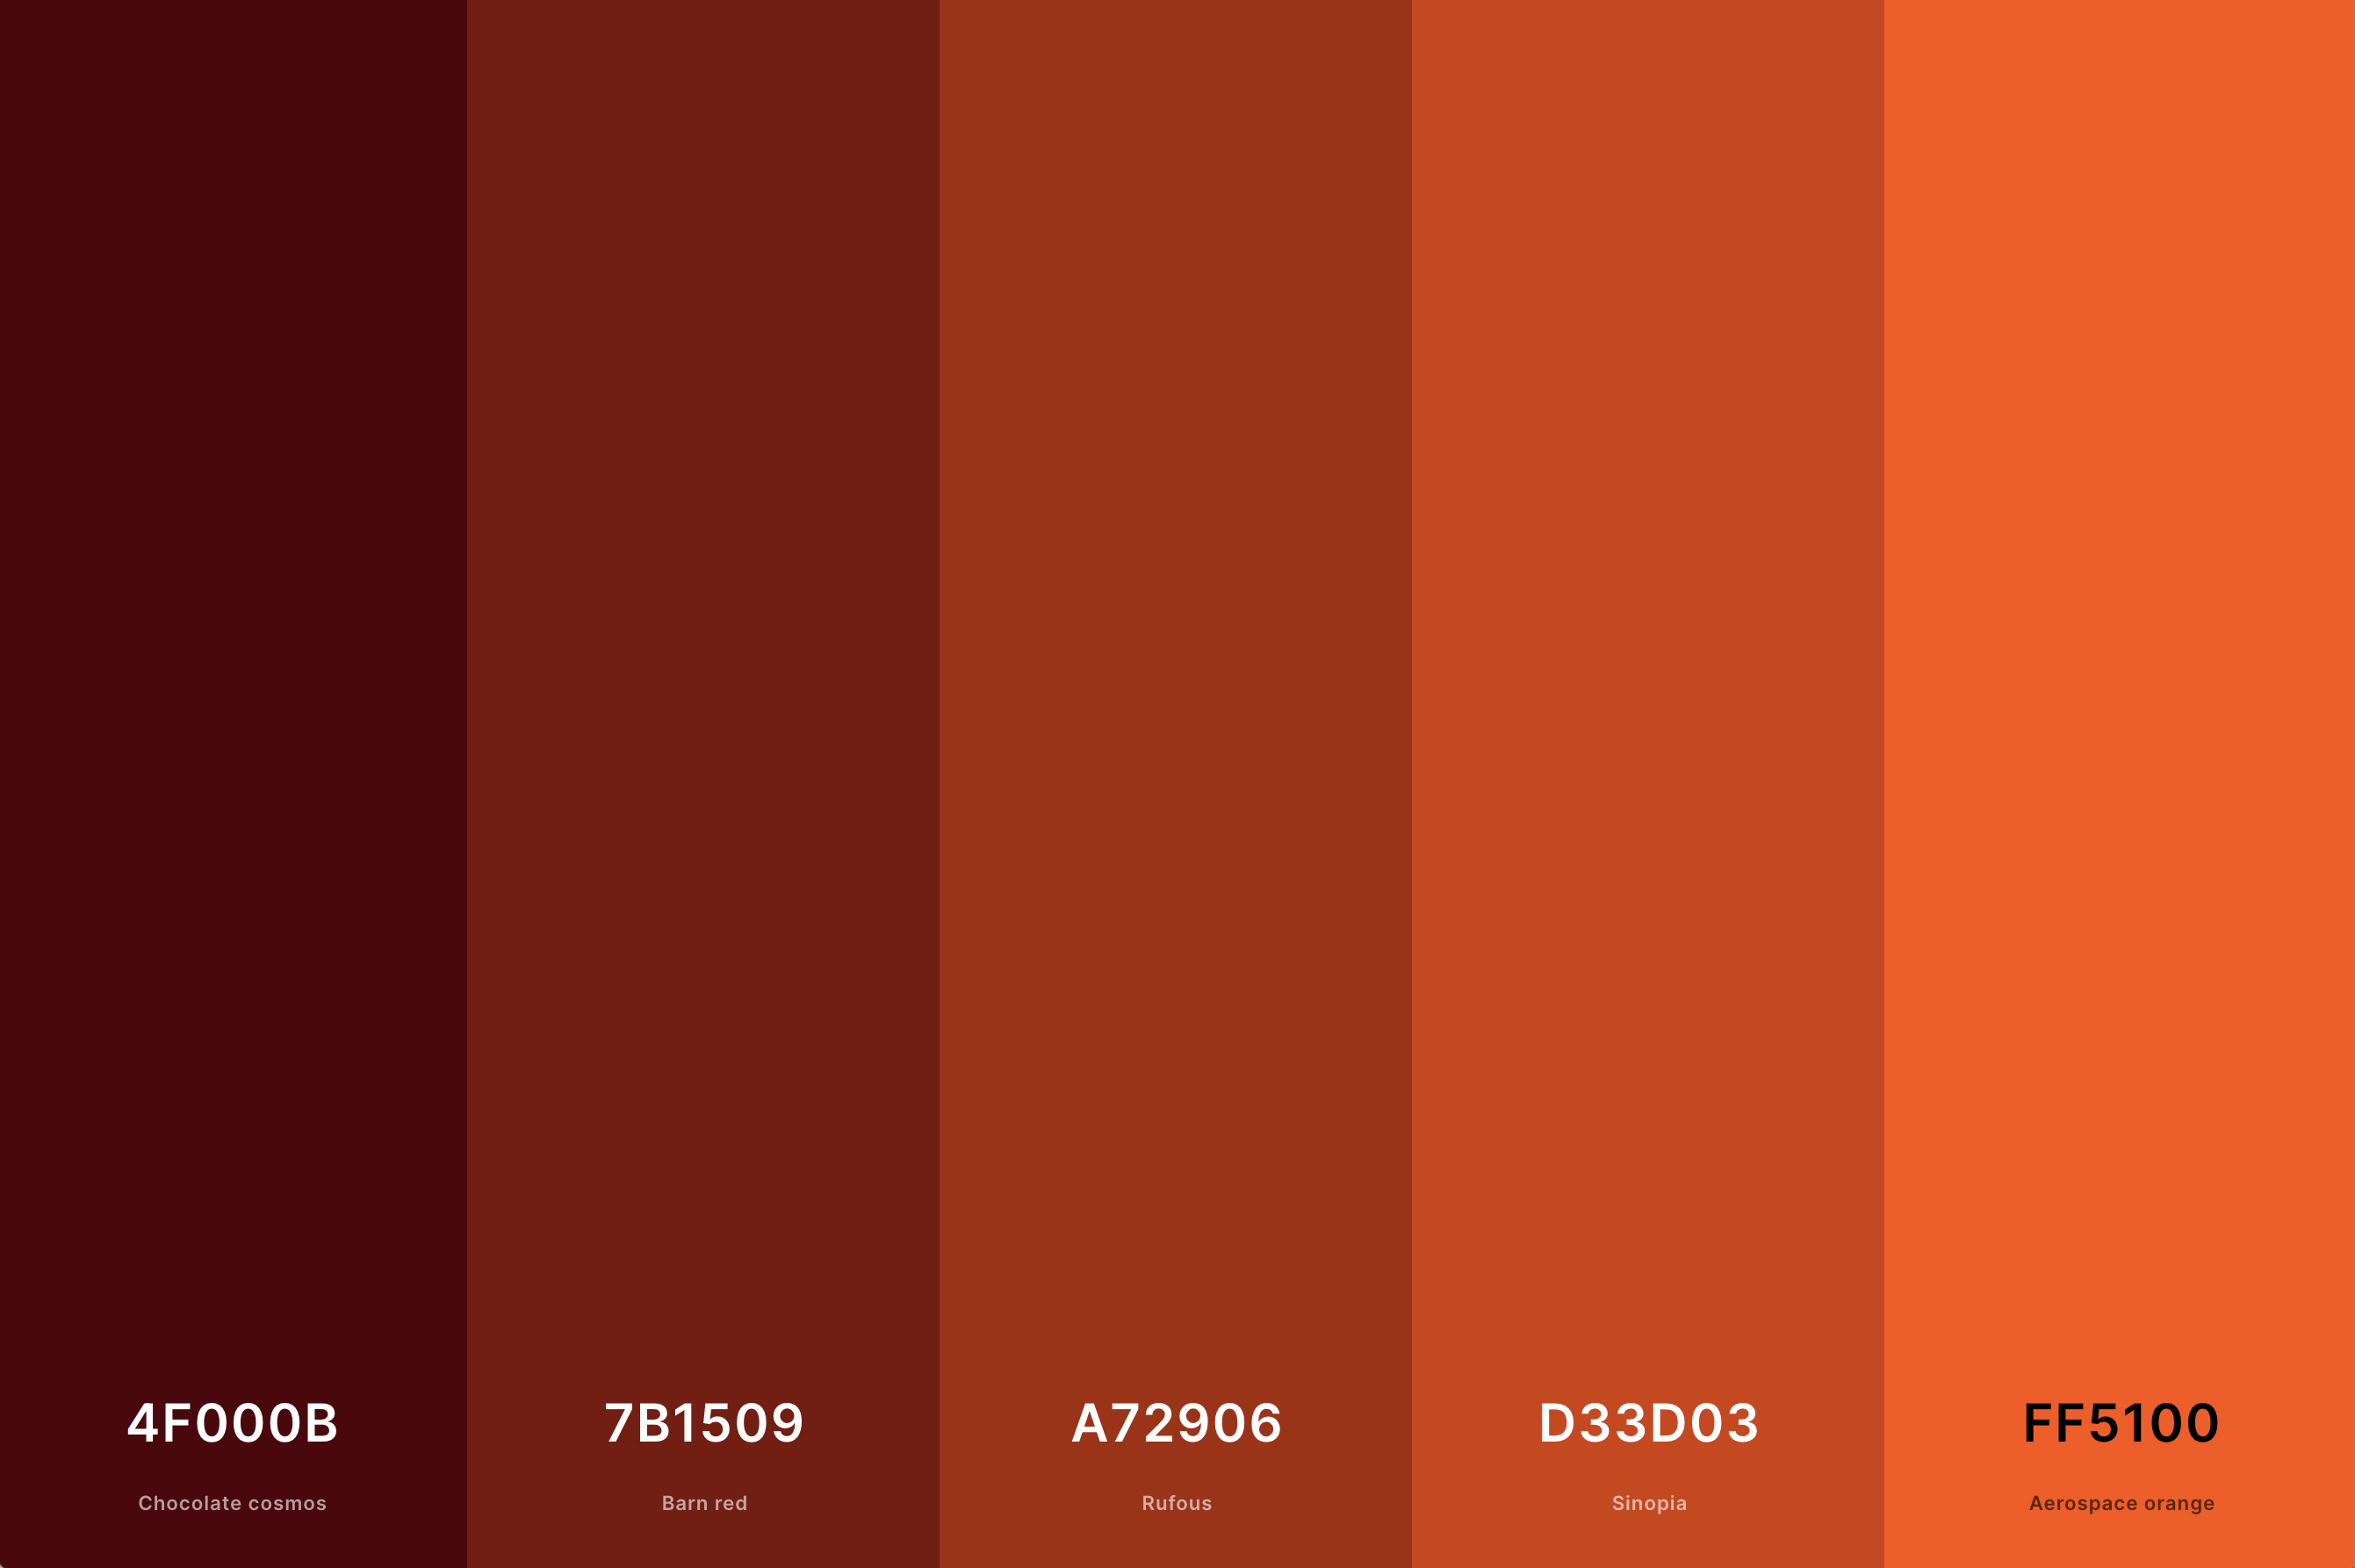 12. Dark Orange Color Palette Color Palette with Chocolate Cosmos (Hex #4F000B) + Barn Red (Hex #7B1509) + Rufous (Hex #A72906) + Sinopia (Hex #D33D03) + Aerospace Orange (Hex #FF5100) Color Palette with Hex Codes